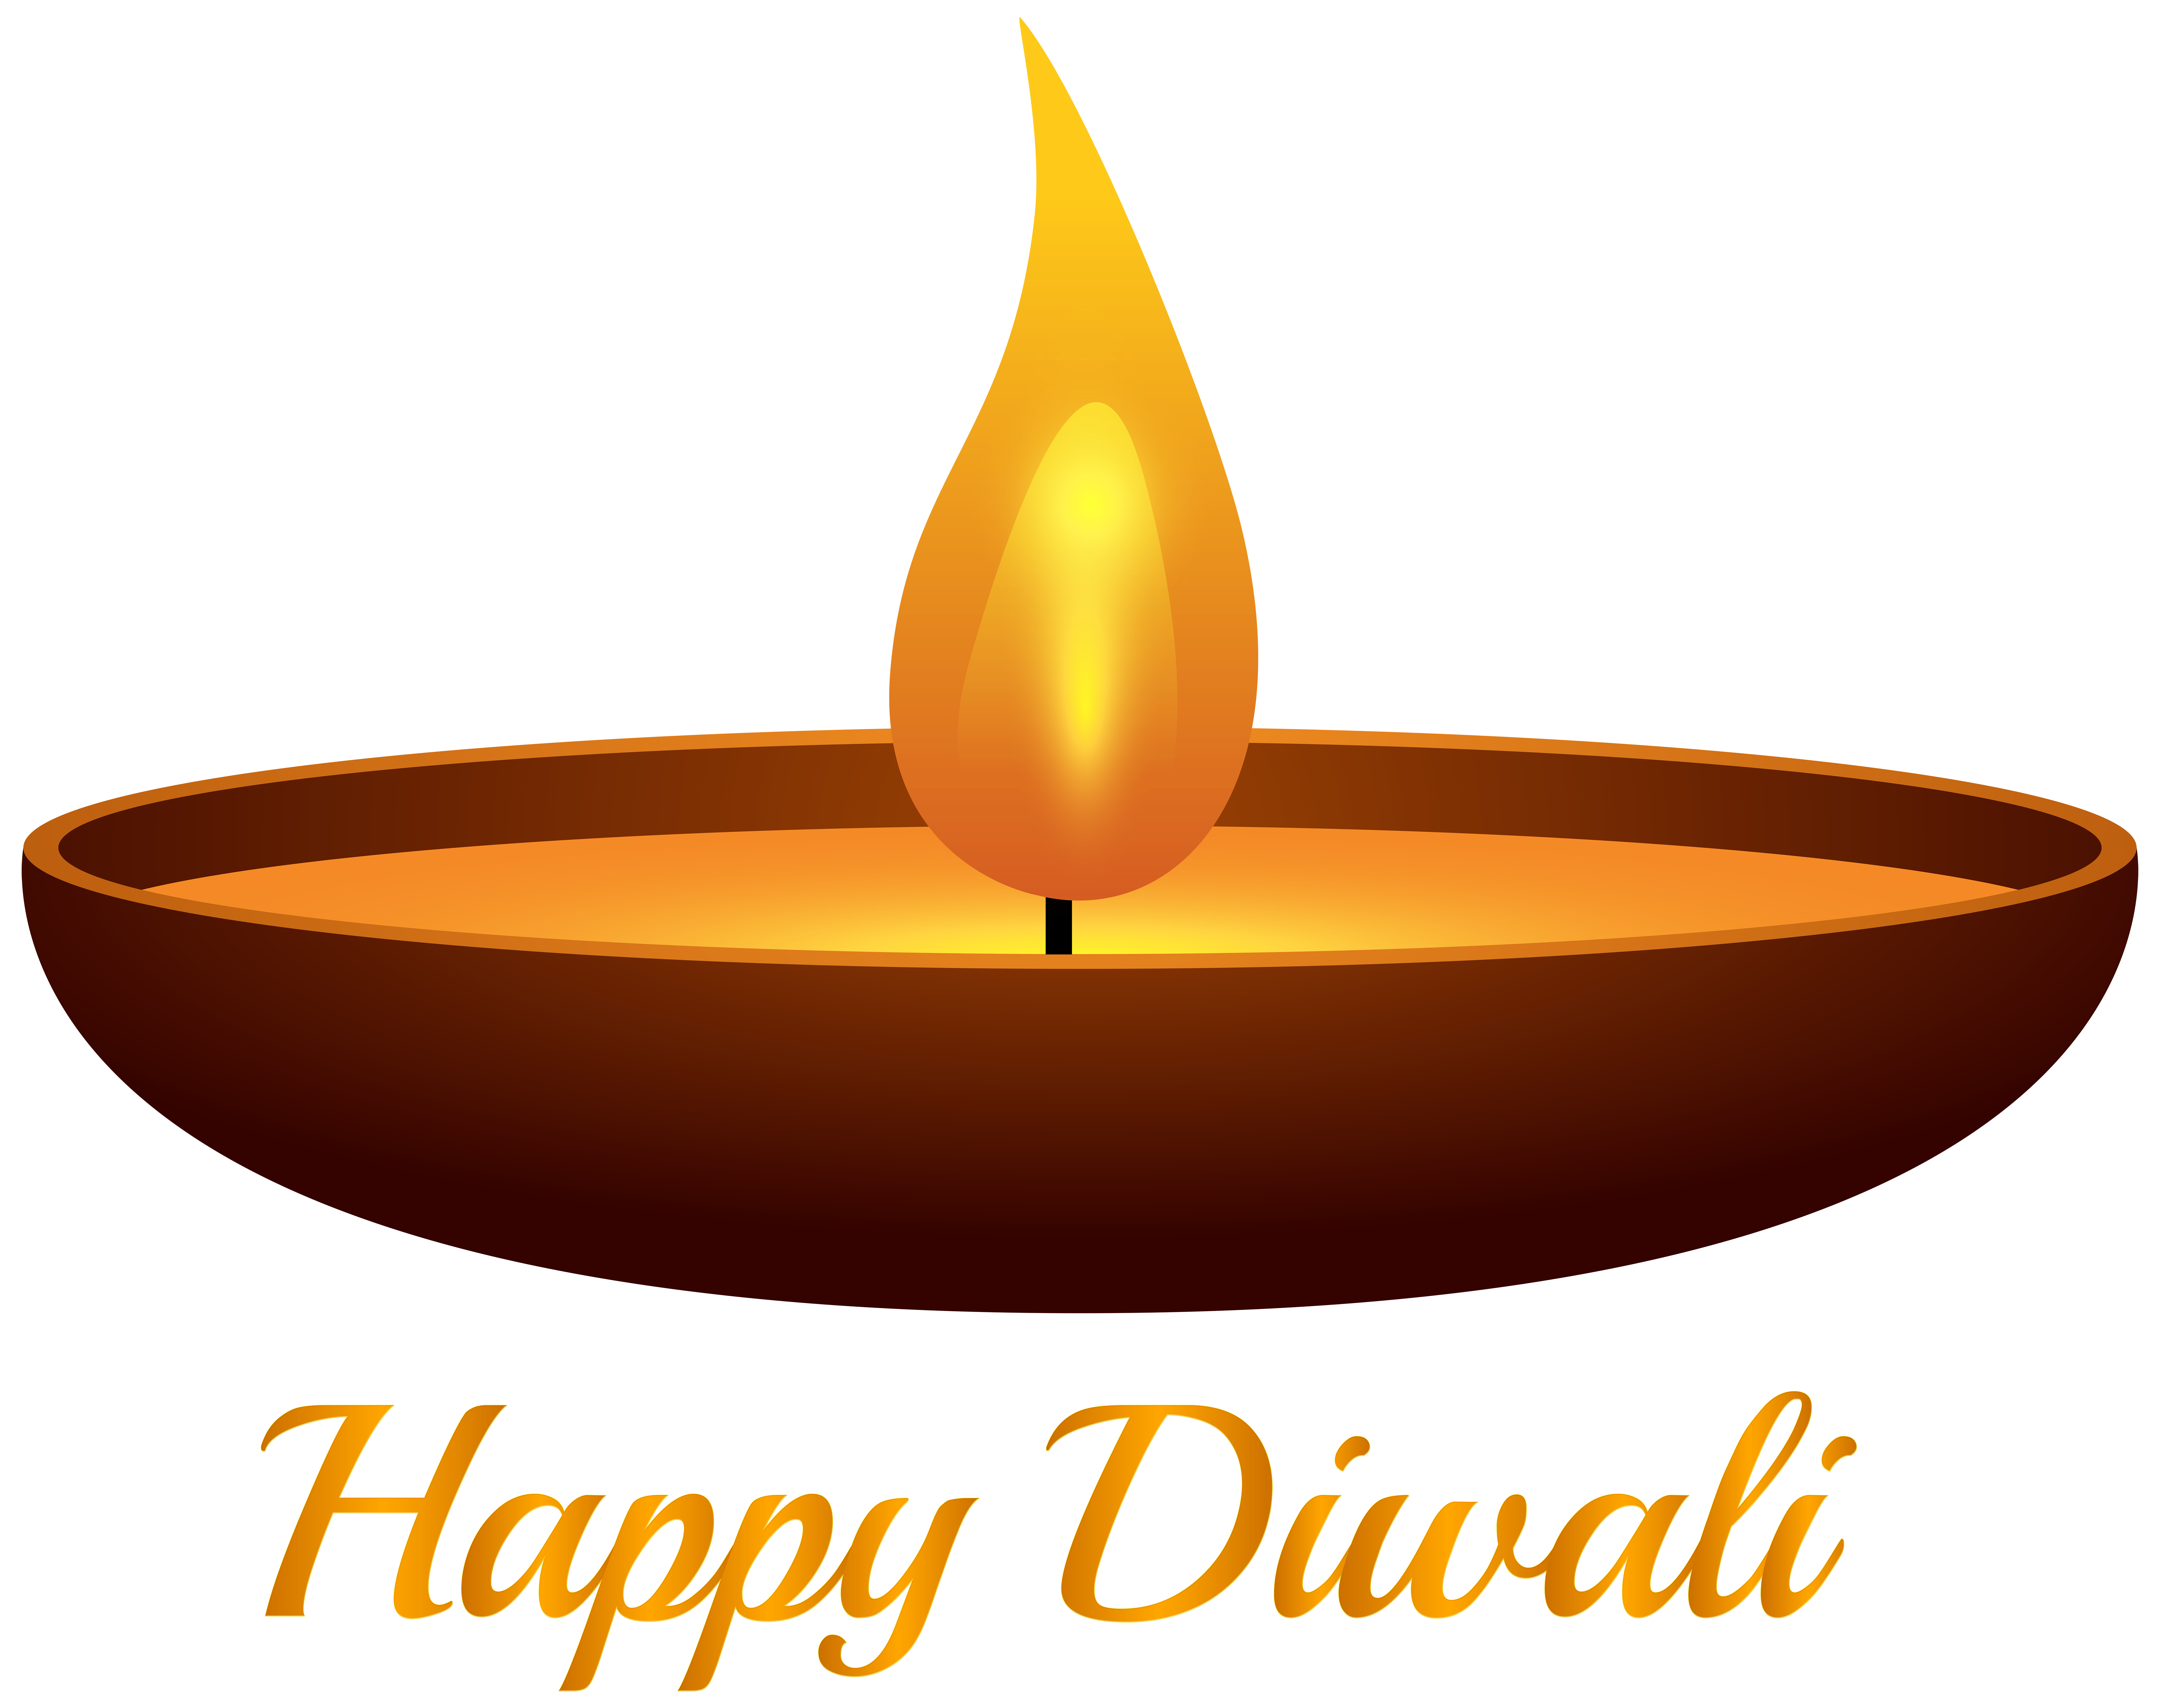 Happy diwali candle png. Working clipart turmoil